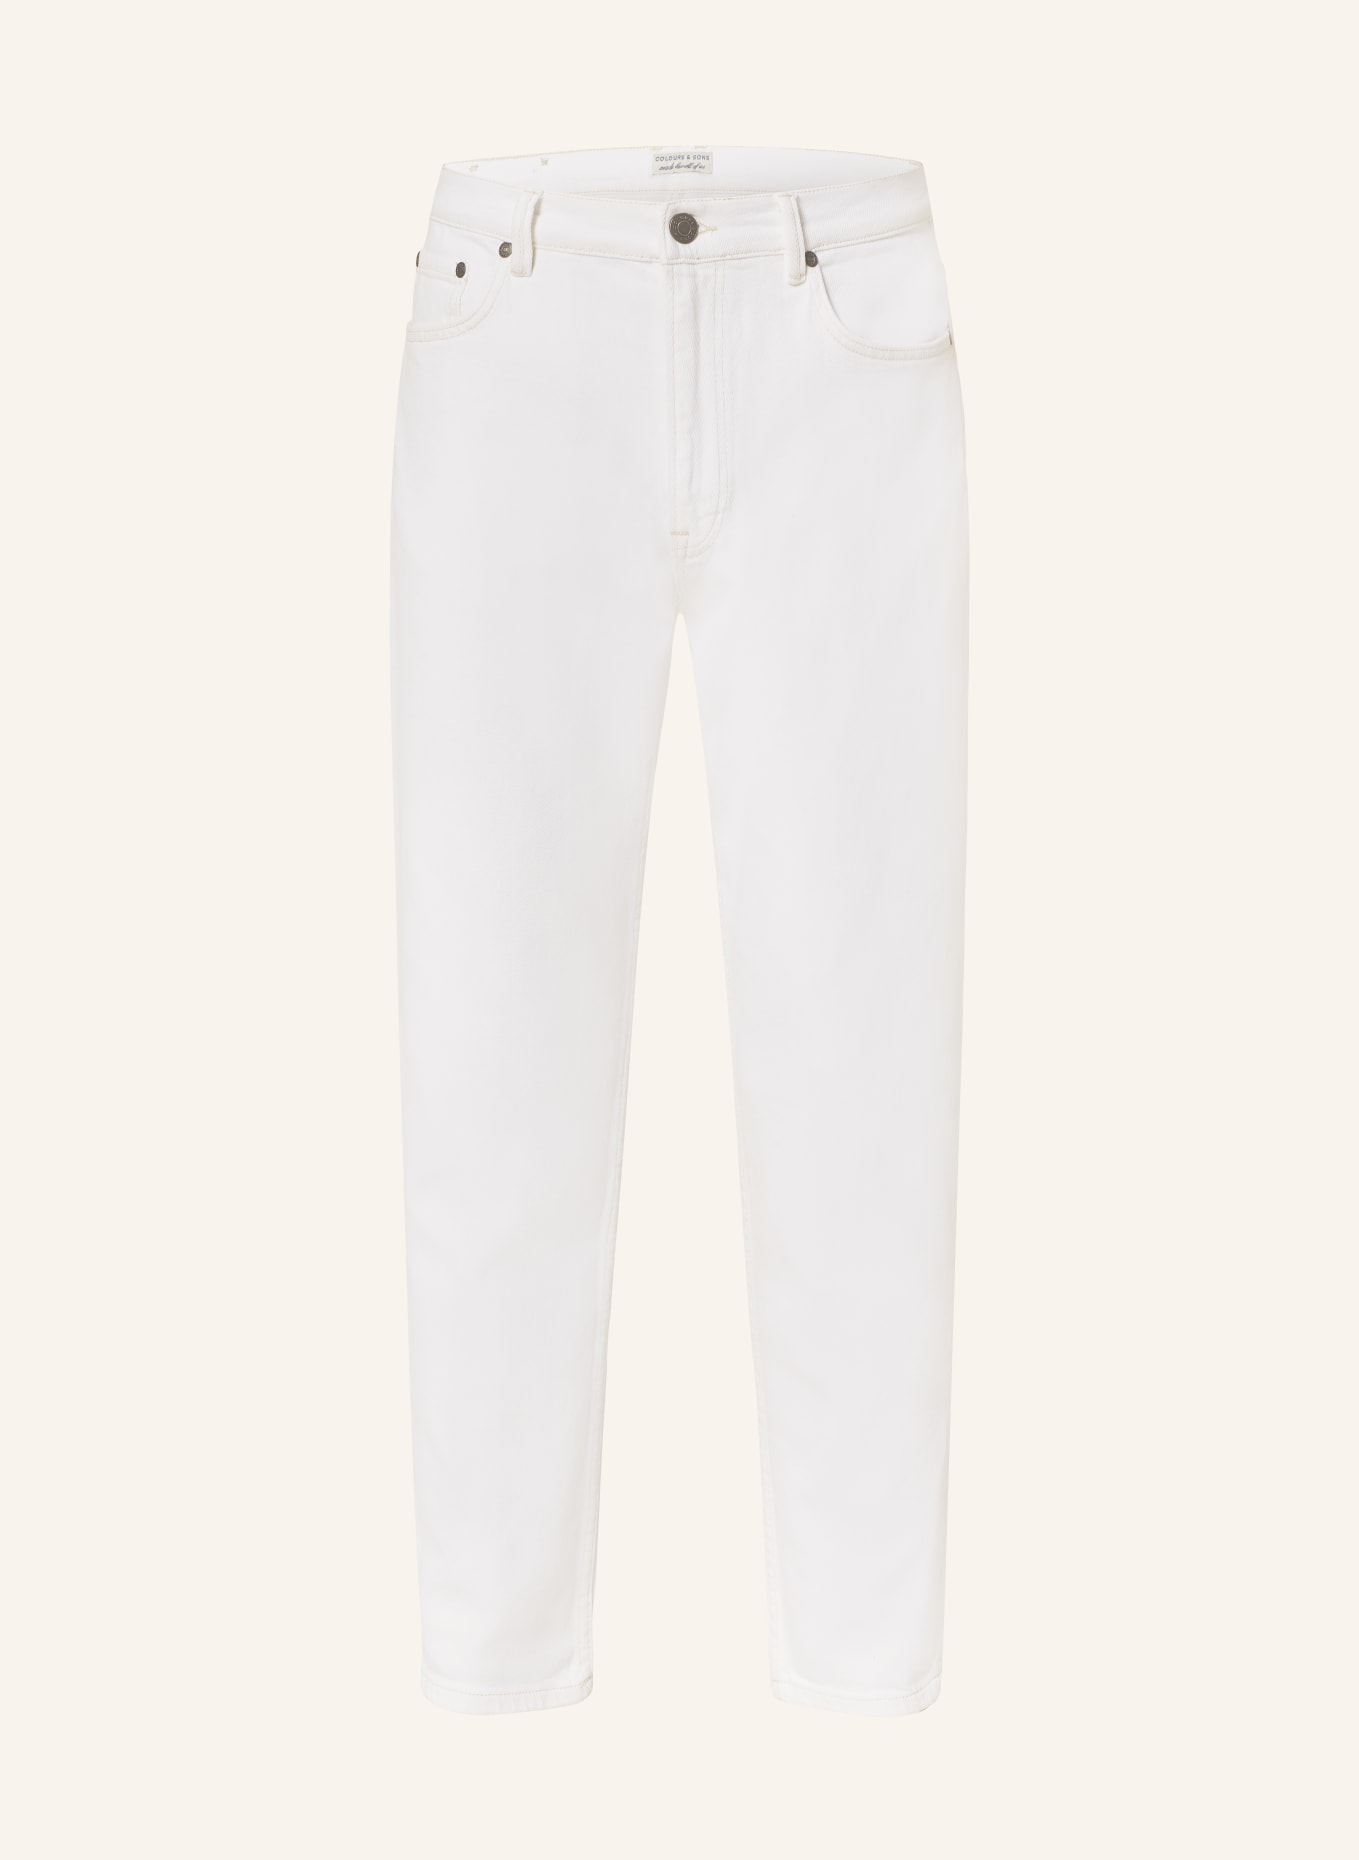 COLOURS & SONS Jeans Relaxed Fit, Farbe: 099 offwhite (Bild 1)